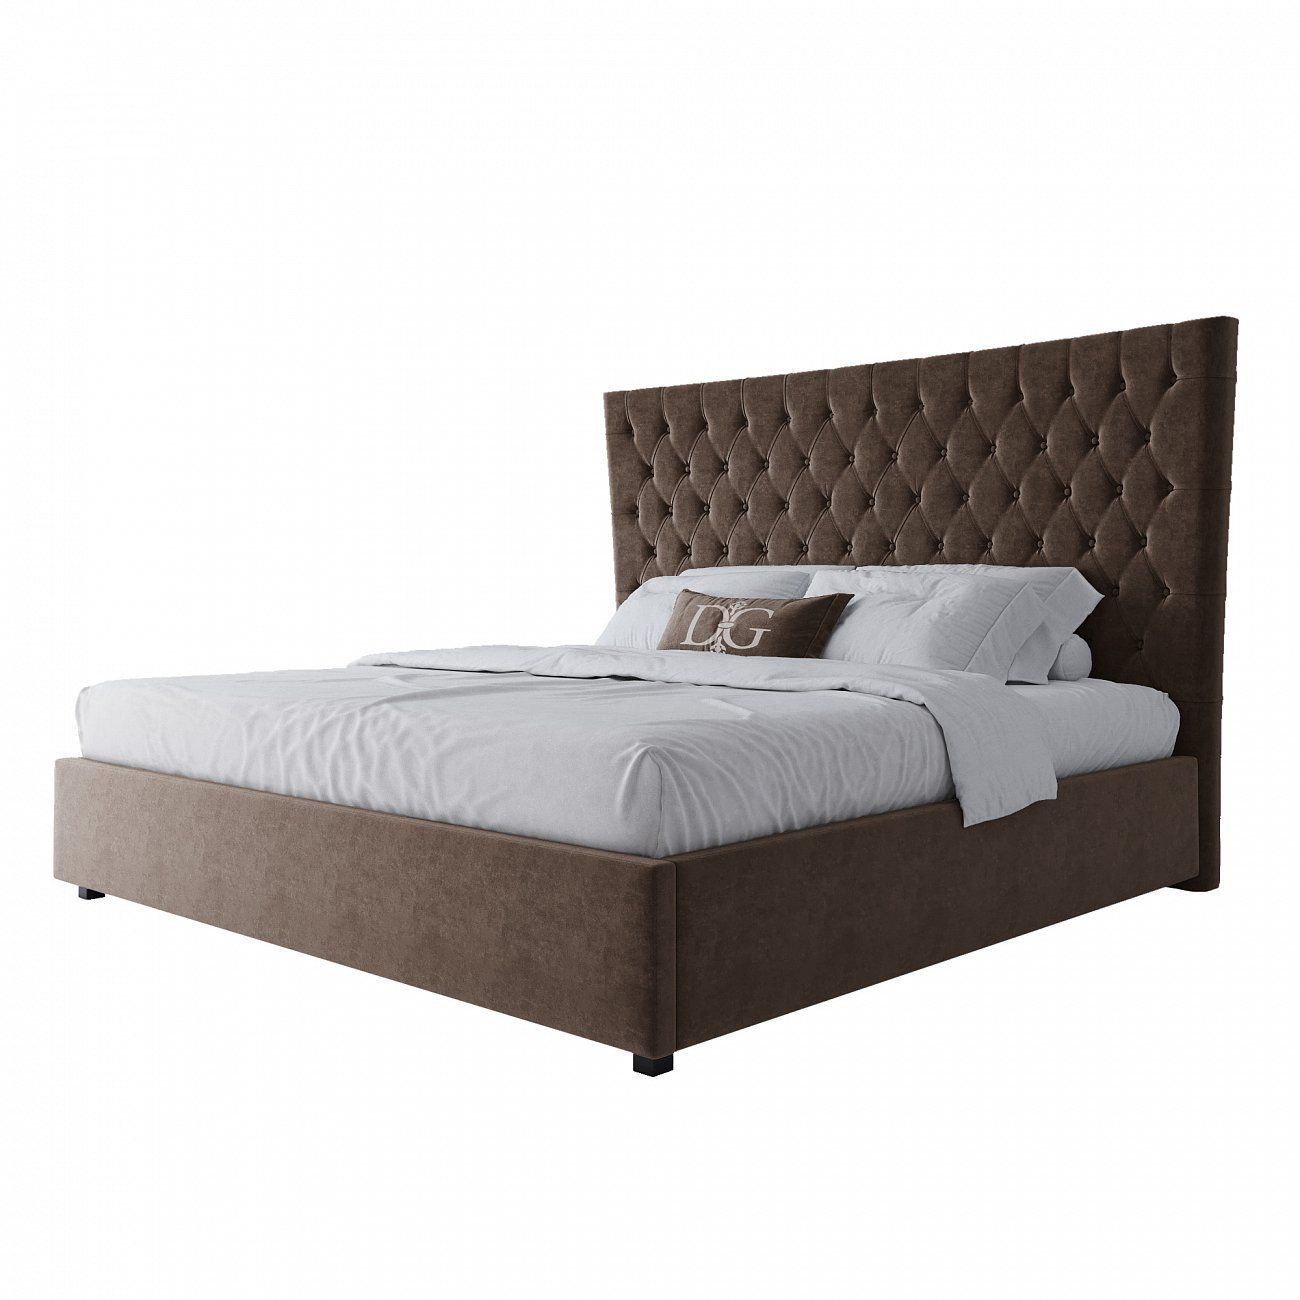 Euro bed 200x200 cm brown QuickSand